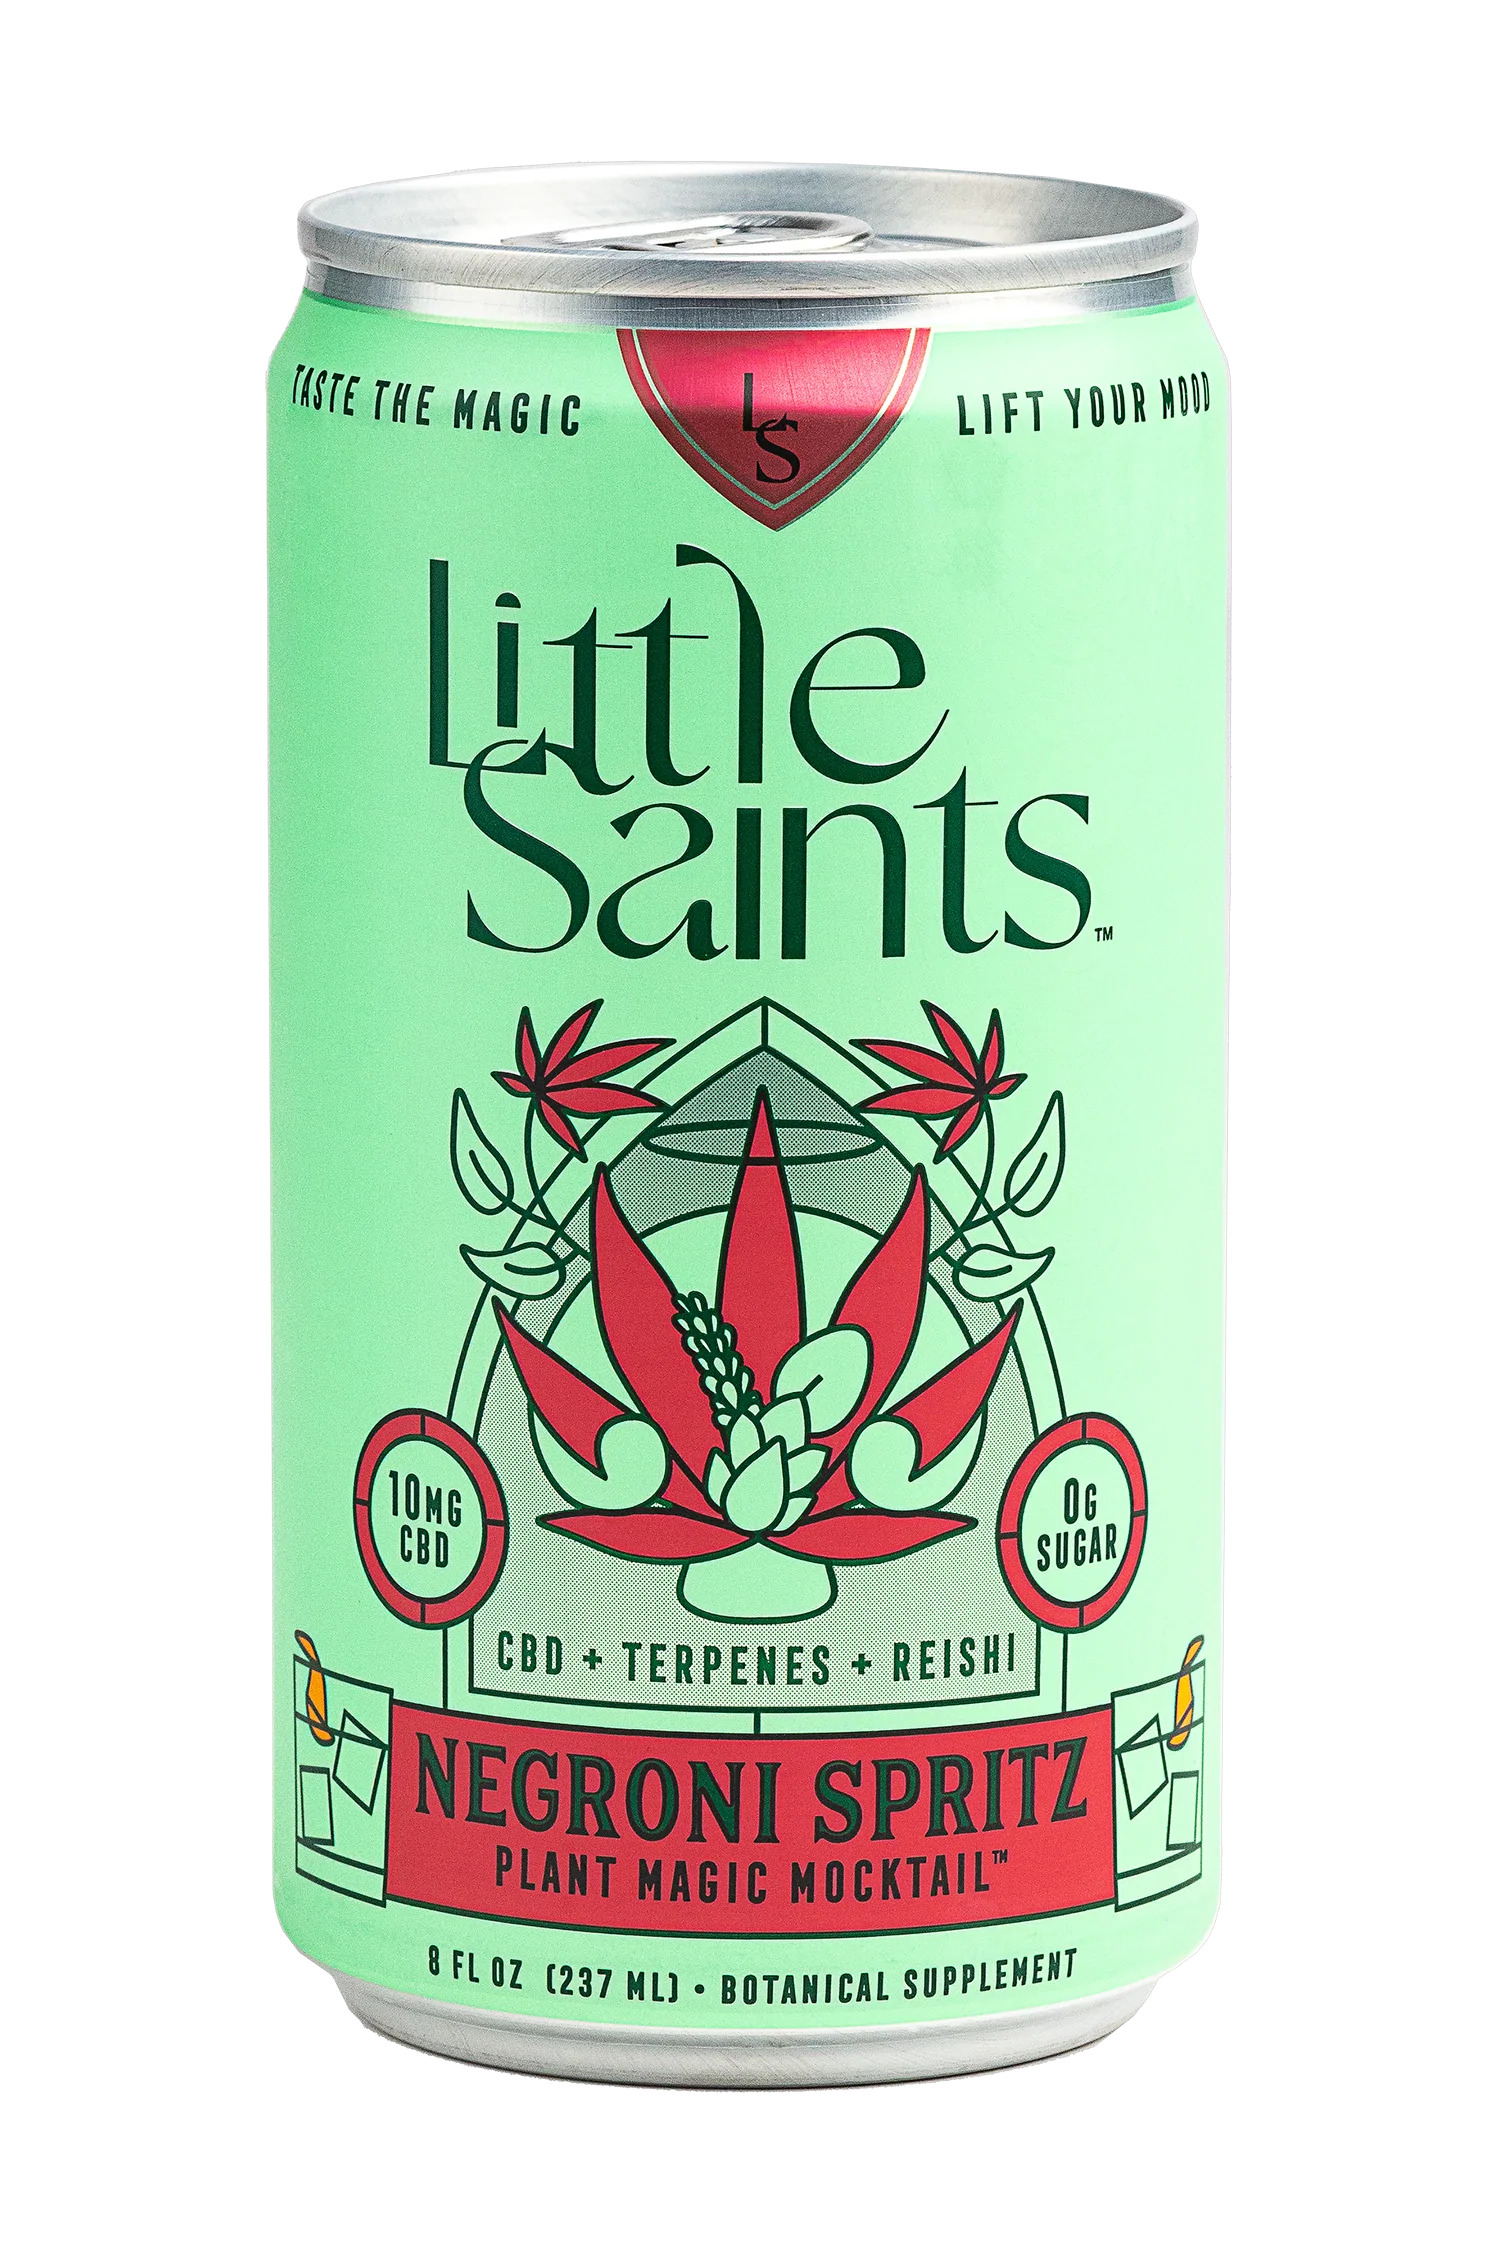 photo of a can of little saints spritz